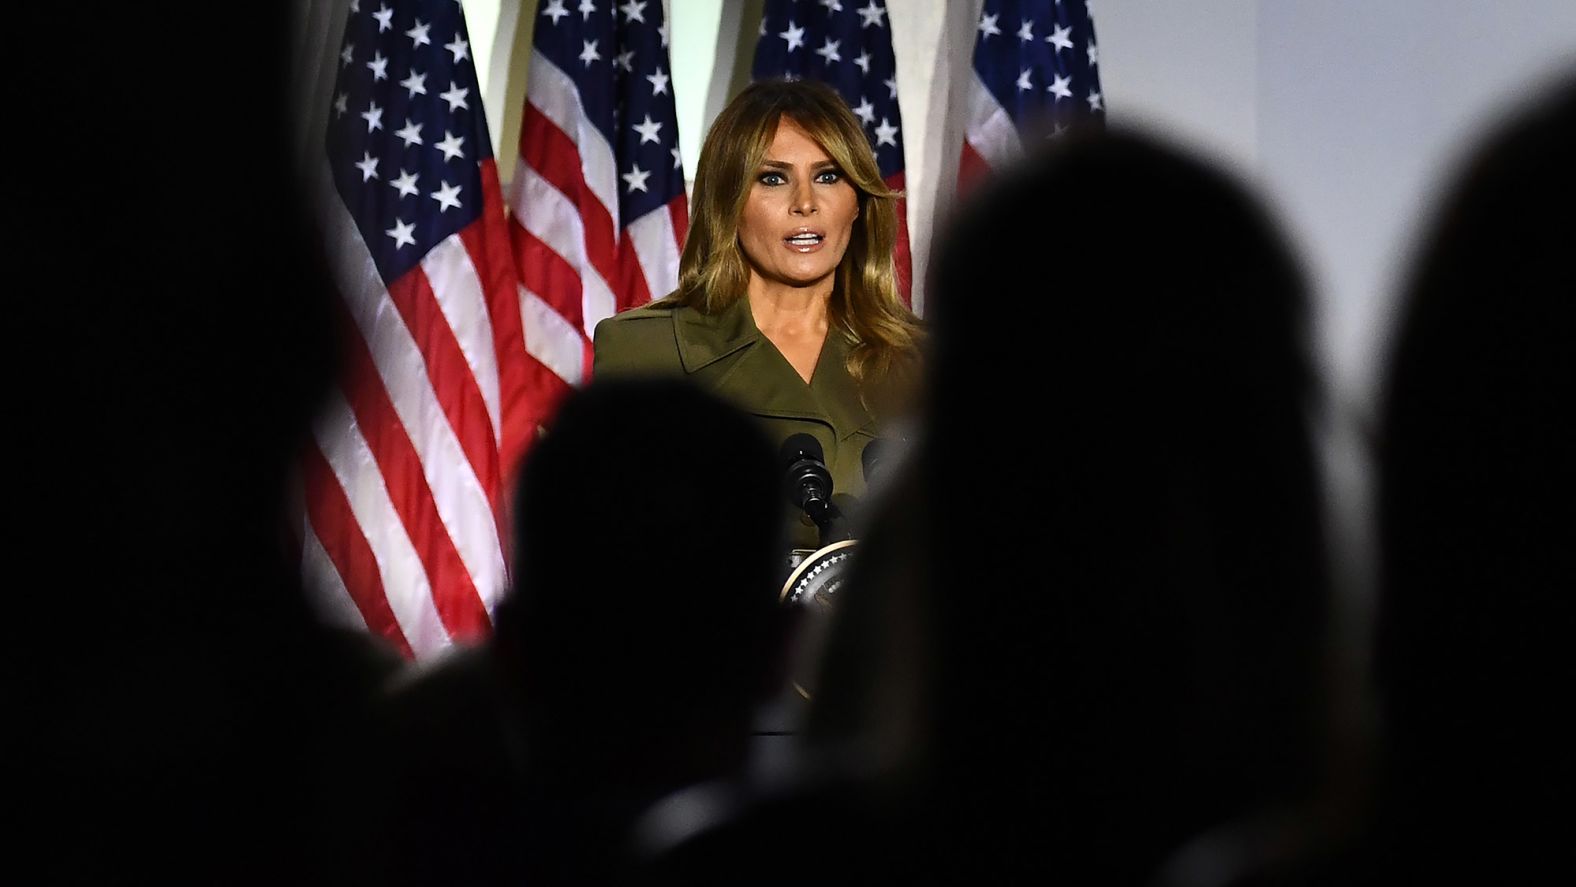 First lady Melania Trump, speaking Tuesday from <a href="index.php?page=&url=https%3A%2F%2Fwww.cnn.com%2F2020%2F08%2F22%2Fpolitics%2Fmelania-trump-rose-garden-restoration%2Findex.html" target="_blank">the newly renovated White House Rose Garden,</a> sought to provide some comfort to families suffering during the coronavirus pandemic: "My deepest sympathy goes out to everyone who has lost a loved one, and my prayers are with those who are ill or suffering," <a href="index.php?page=&url=https%3A%2F%2Fwww.cnn.com%2Fpolitics%2Flive-news%2Frnc-2020-day-2%2Fh_b977ea6f0573d18b03123ee0836b237e" target="_blank">she said.</a> "I know many people are anxious and some feel helpless. I want you to know you are not alone."